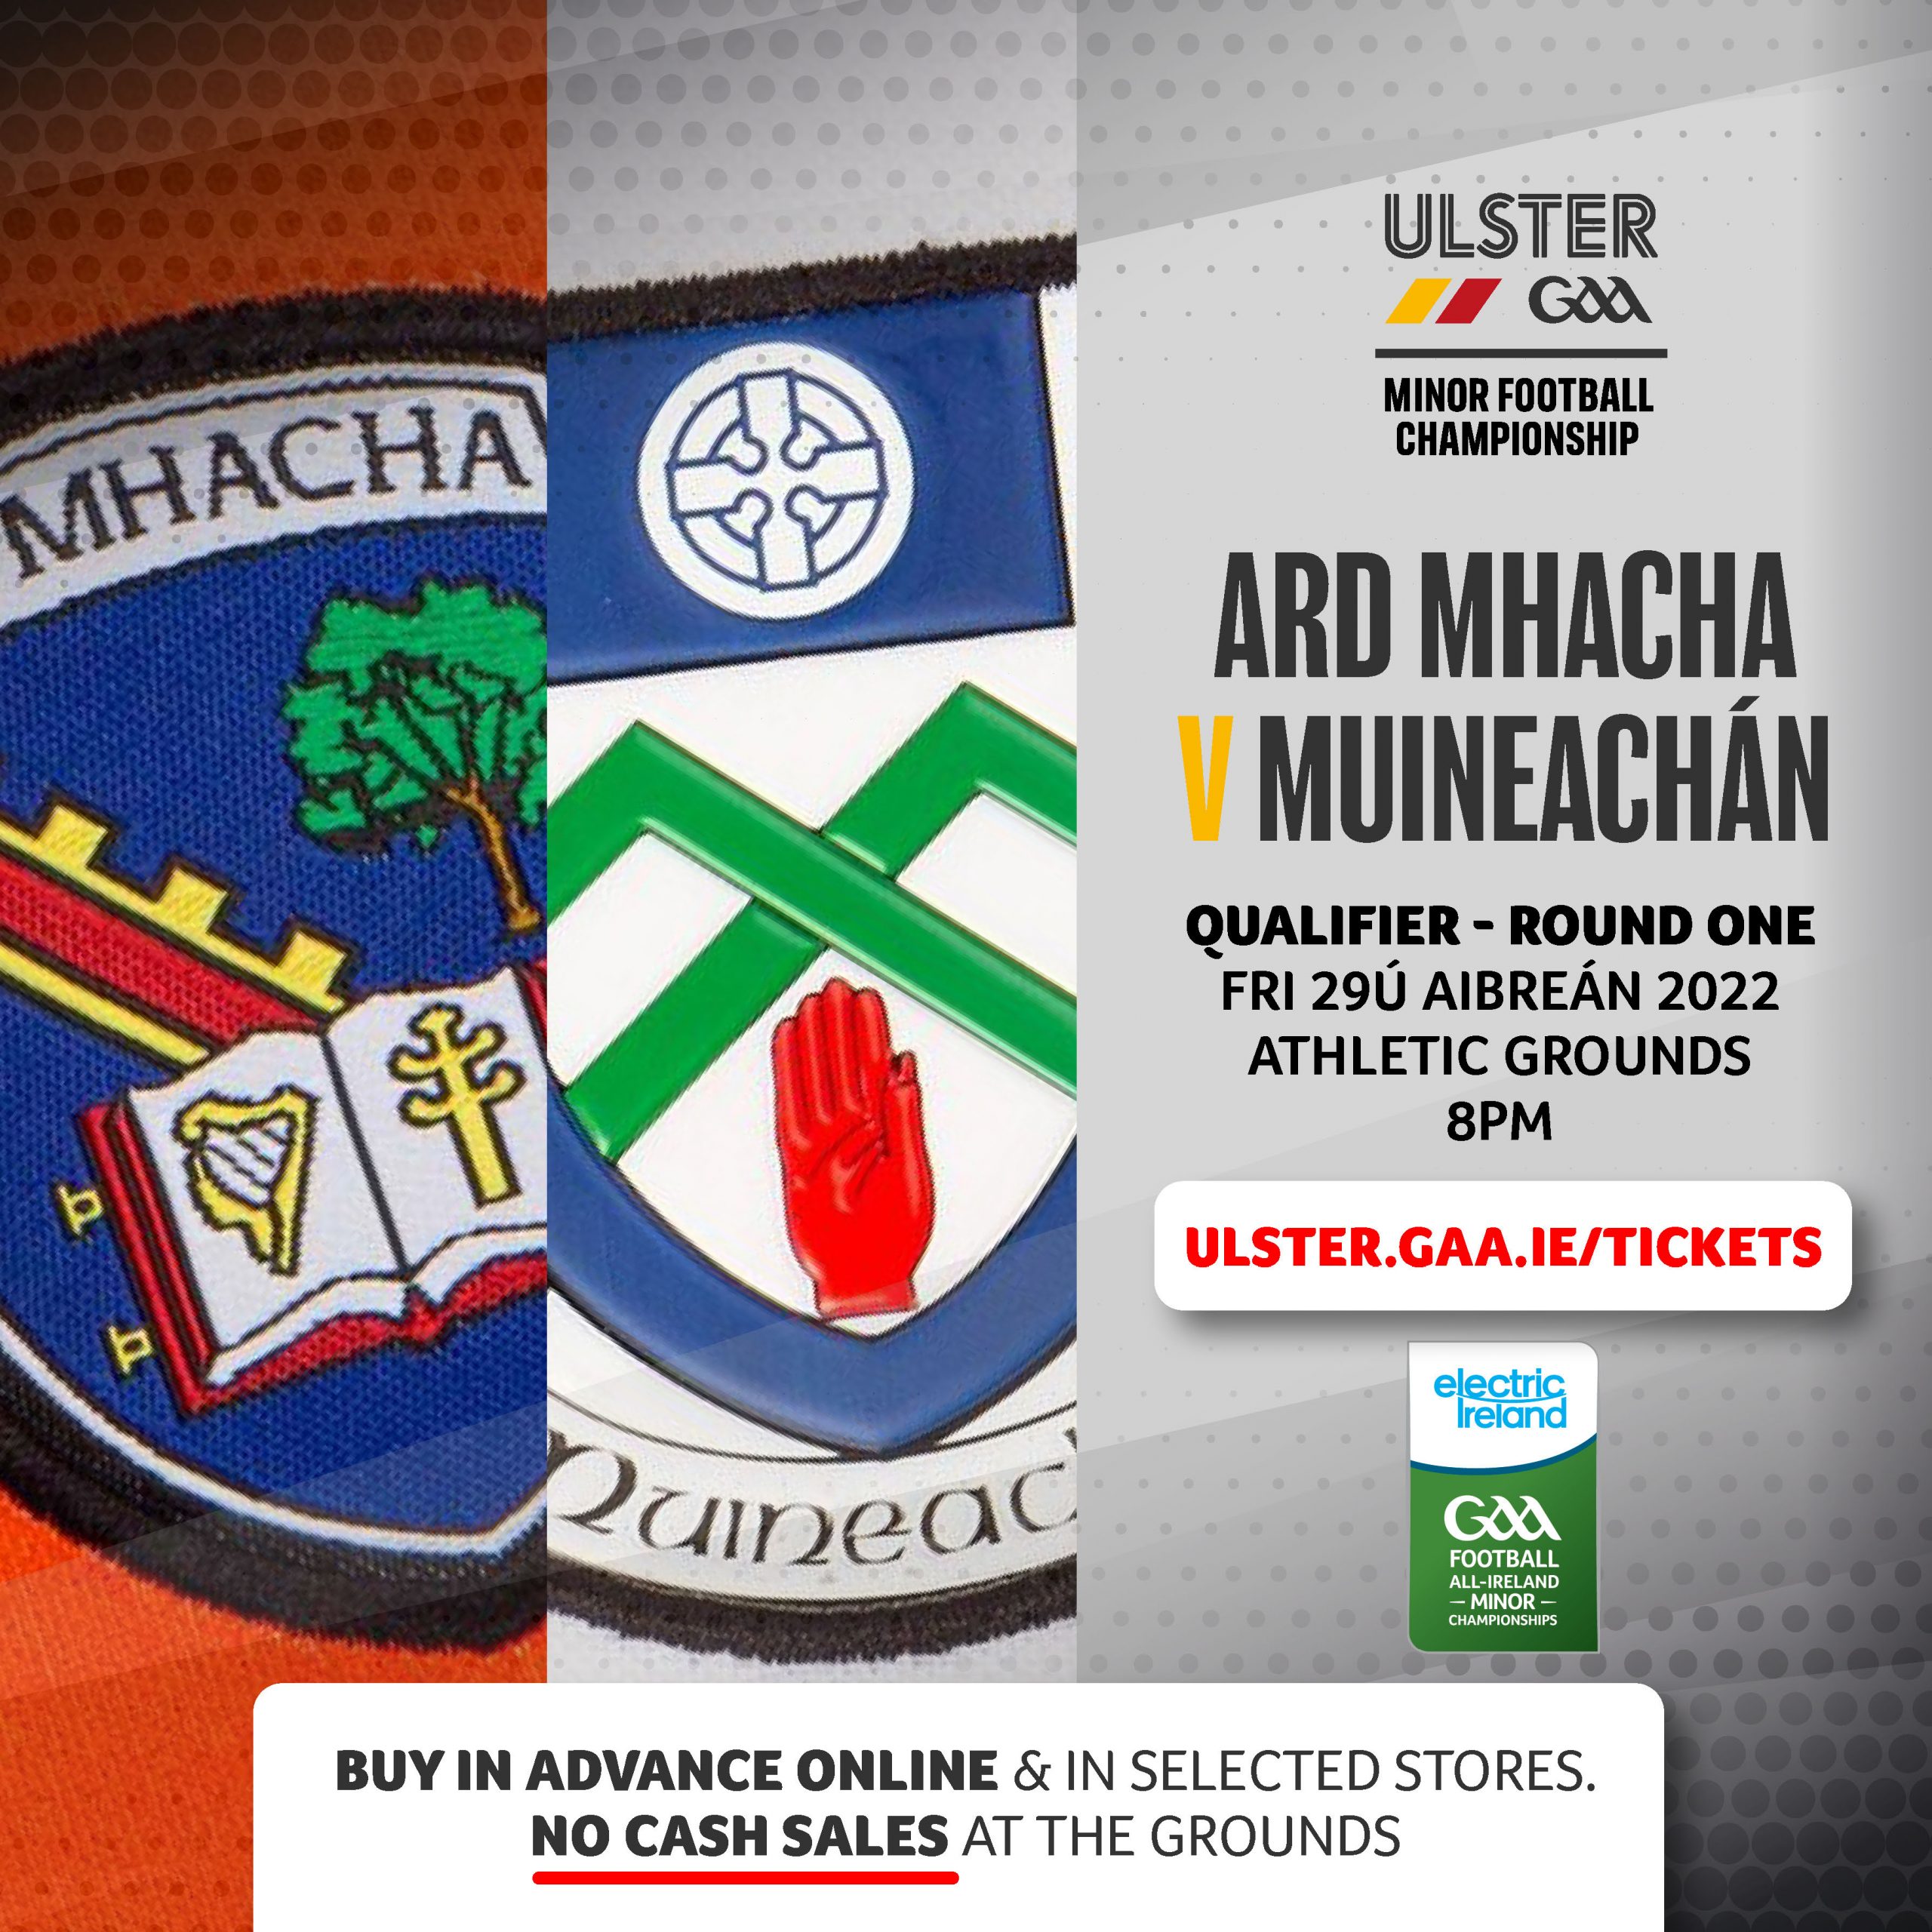 Electric Ireland Ulster Minor Championship – PLEASE NOTE – All juveniles will need a ticket